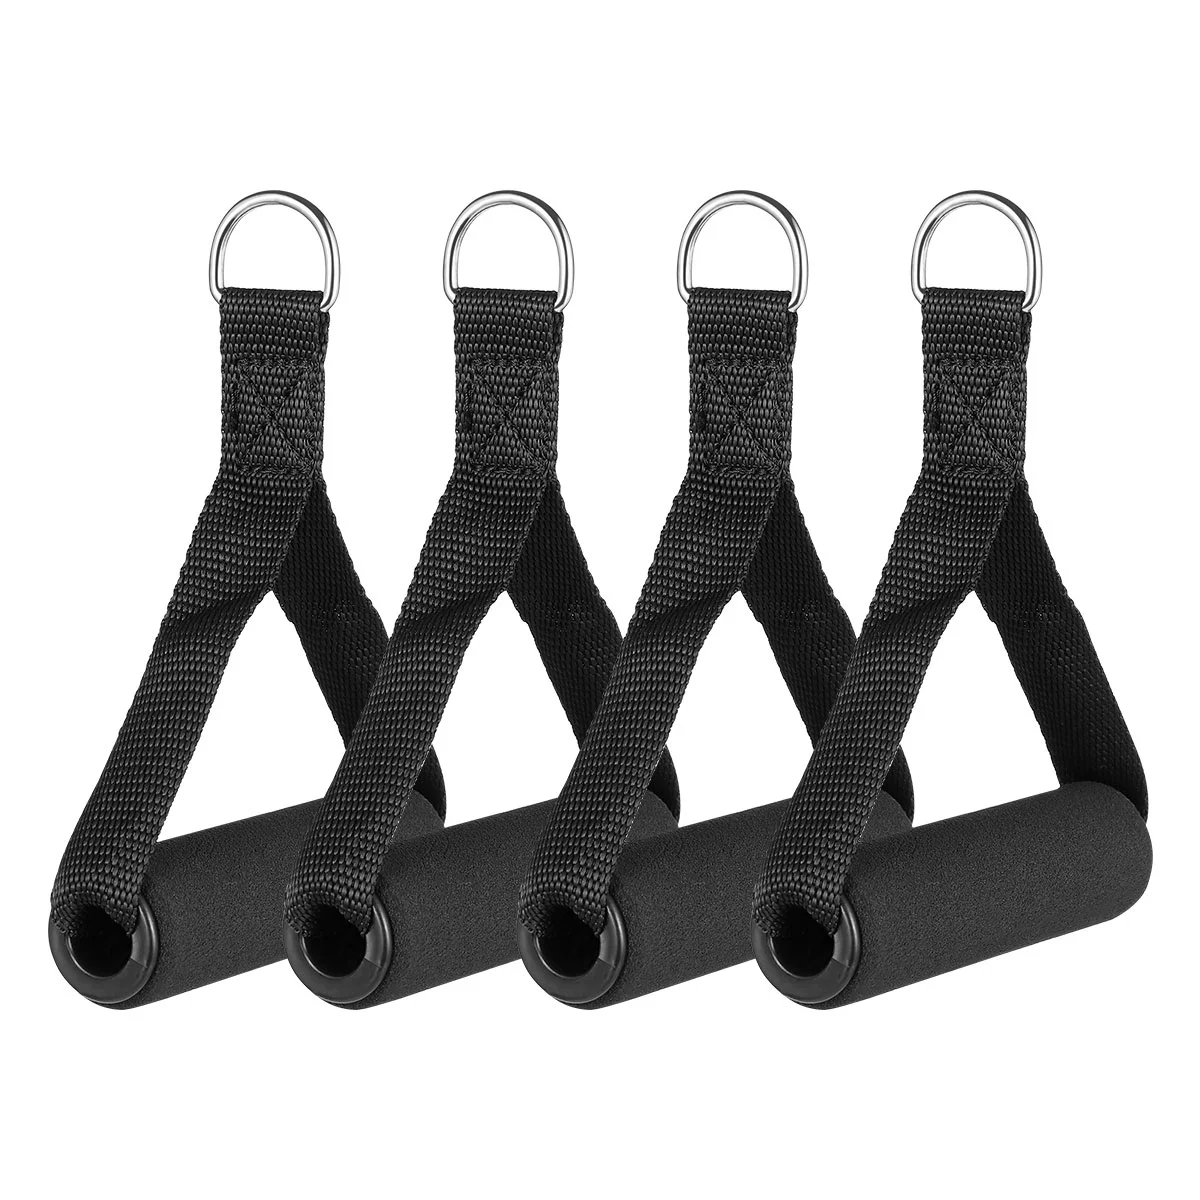 

4Pcs Single-Grip Handle Portable Foam Wrapped Lightweight Resistance Tube Exercise Handle for Training Exercising Fitness